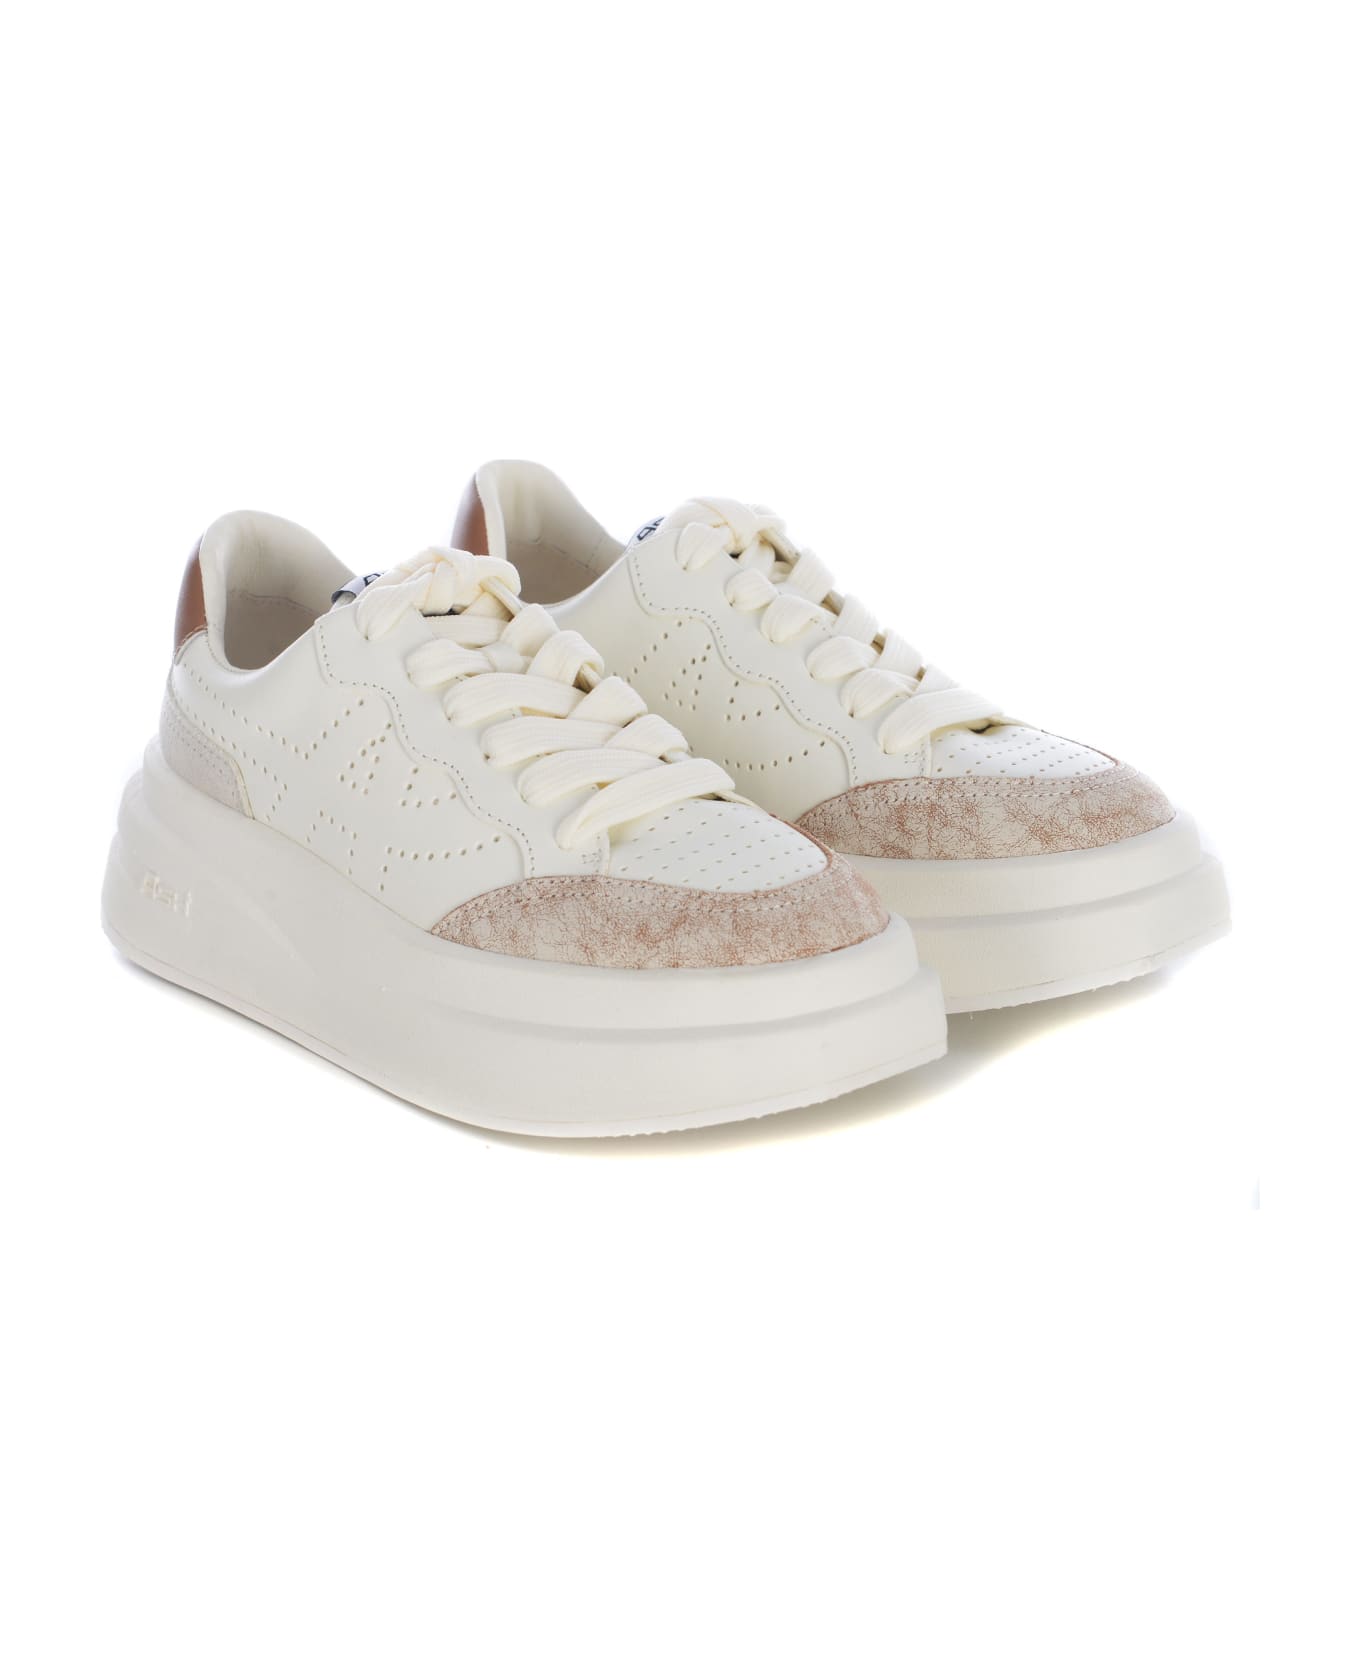 Ash Sneakers Ash "impuls" Made Of Leather - Bianco ウェッジシューズ